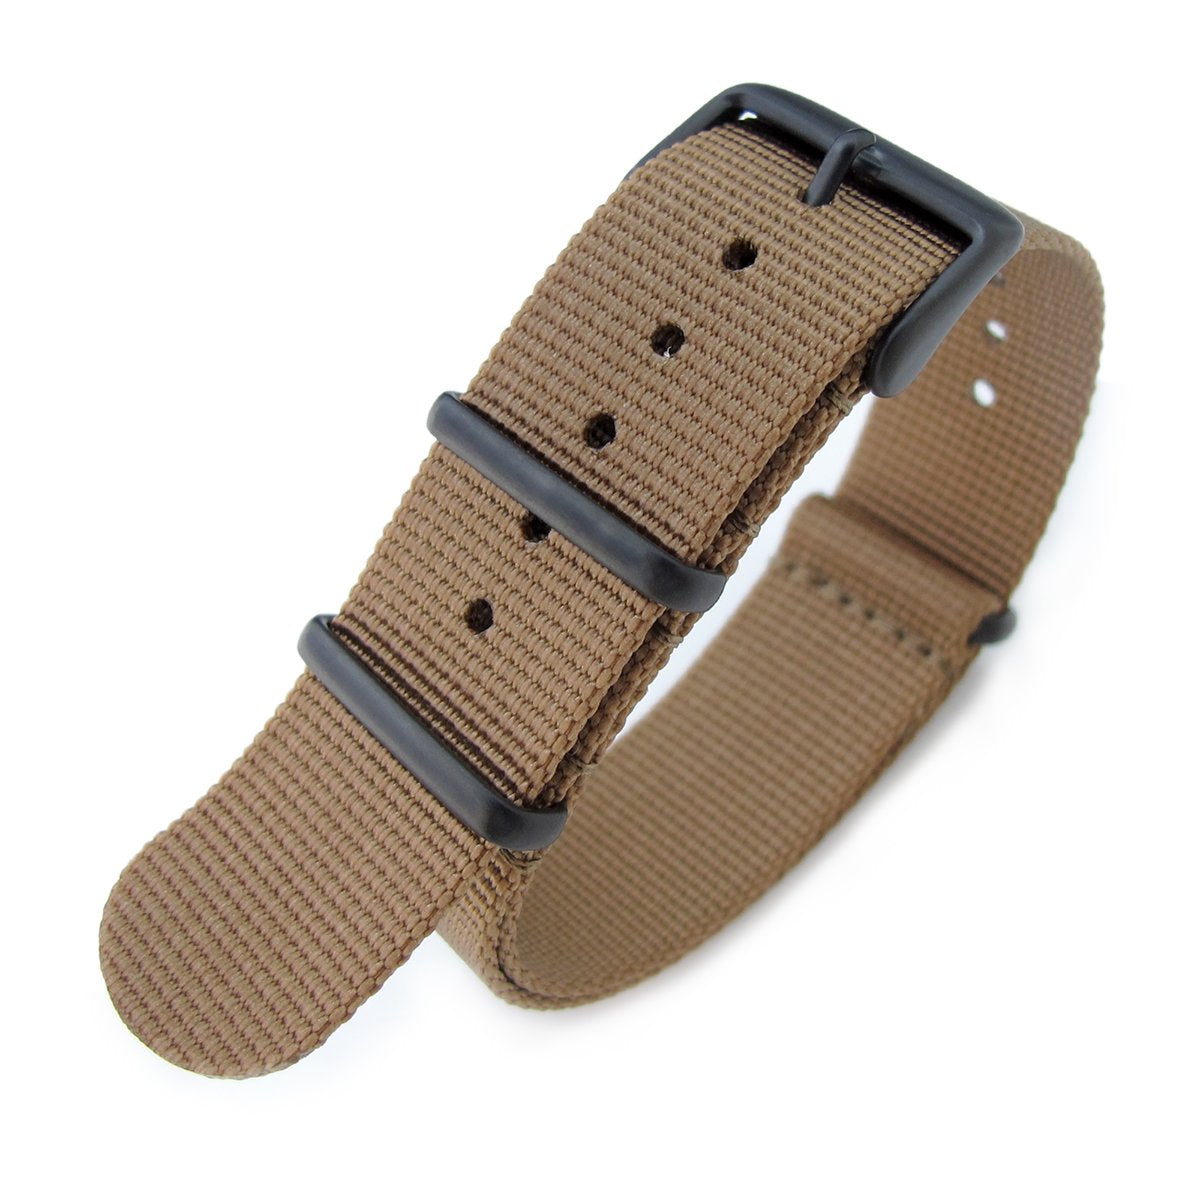 NATO 20mm G10 Military Watch Band Nylon Strap Brown PVD Black 260mm Strapcode Watch Bands